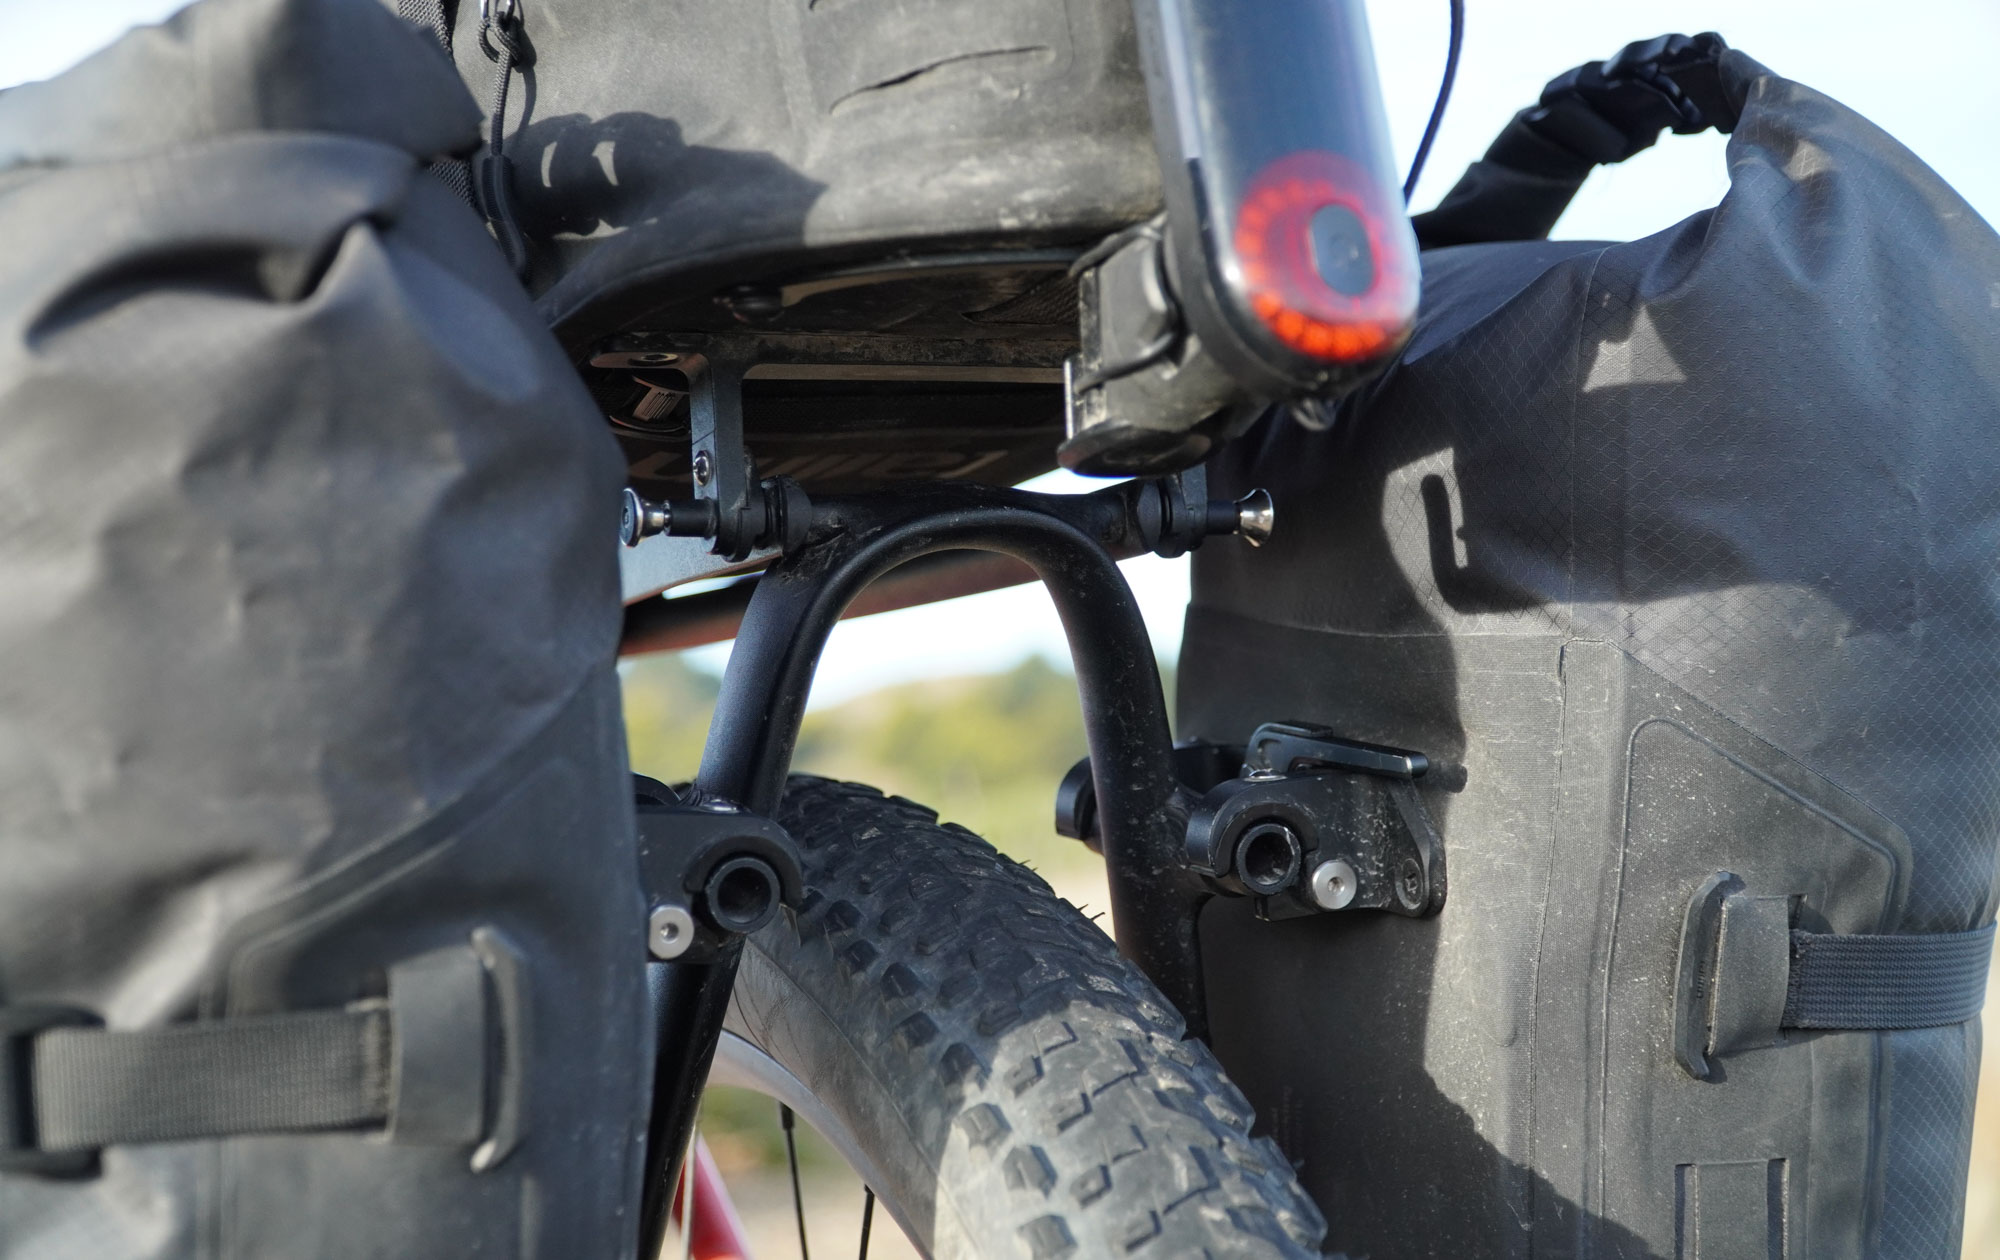 A closeup of the Tailfin rear rack with its sturdy tubular construction.